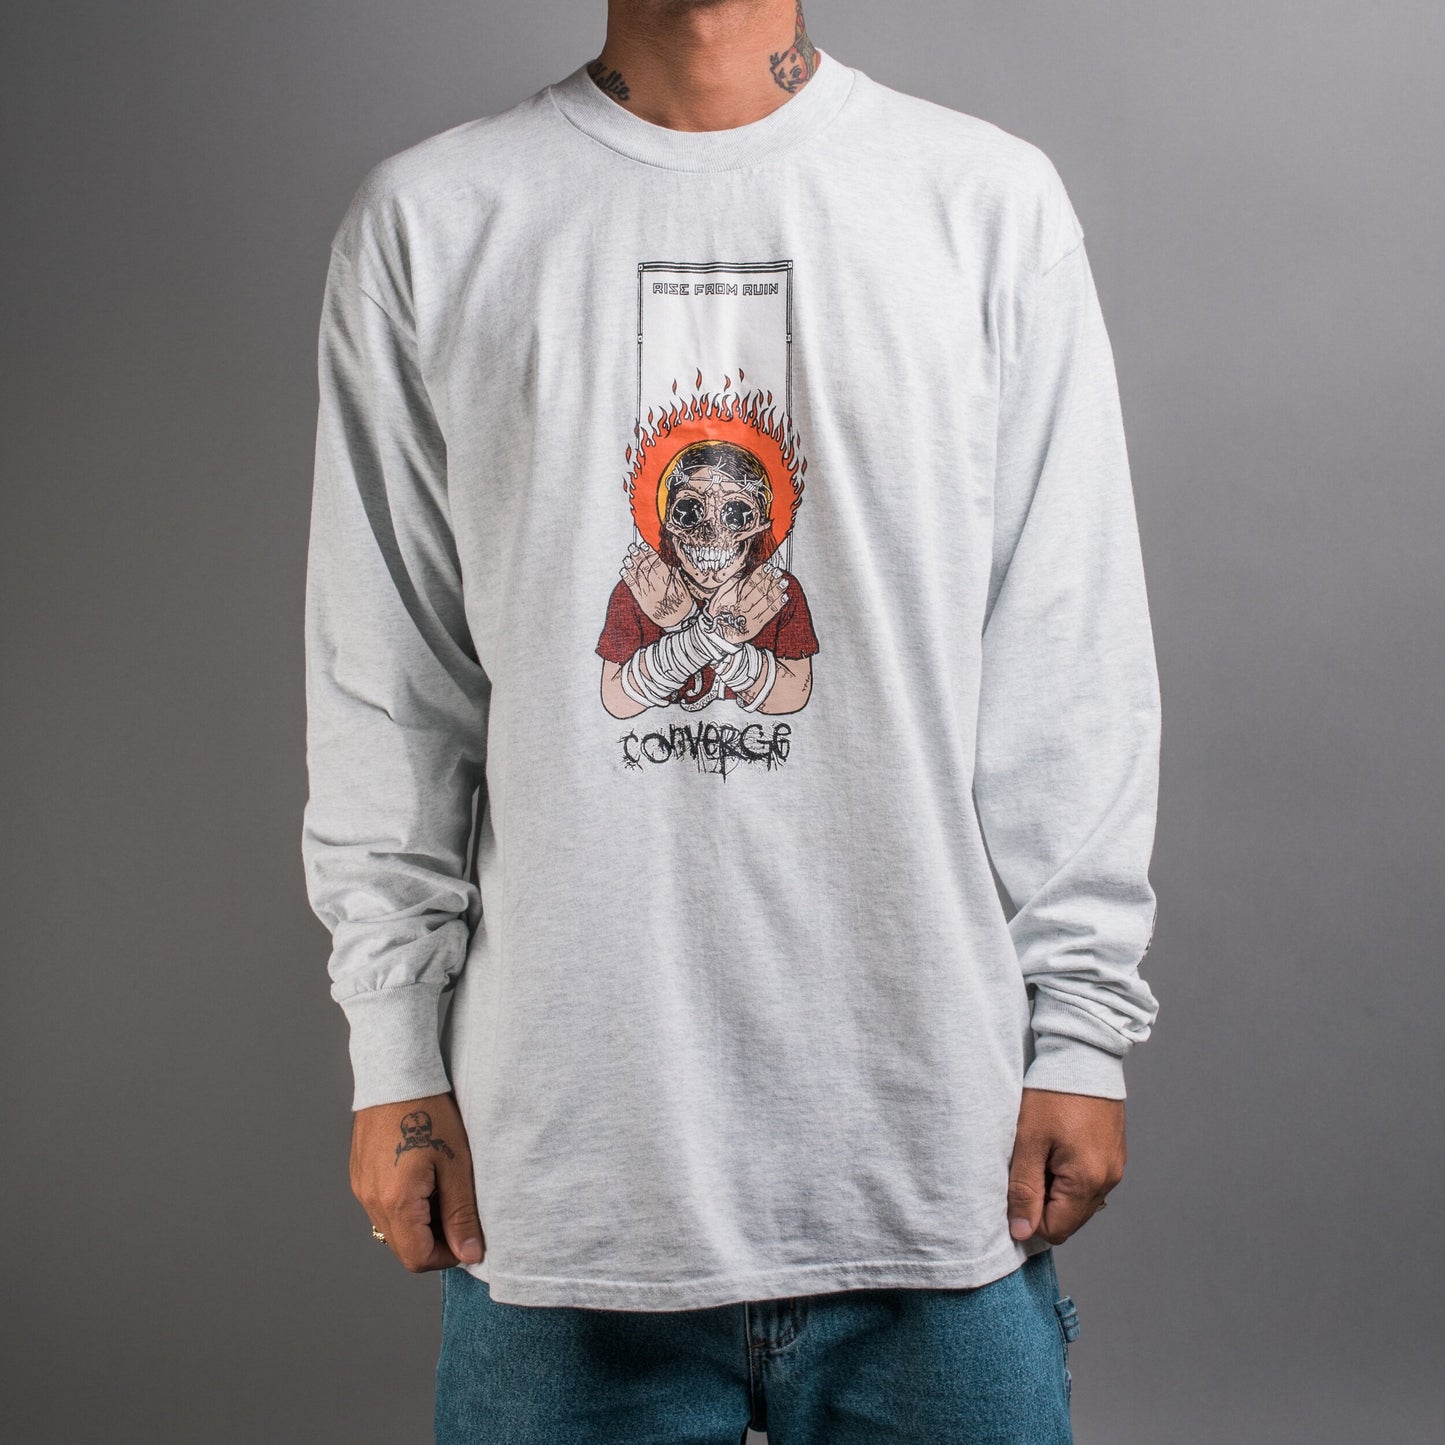 Vintage 90’s Converge Rise From Ruin Longsleeve